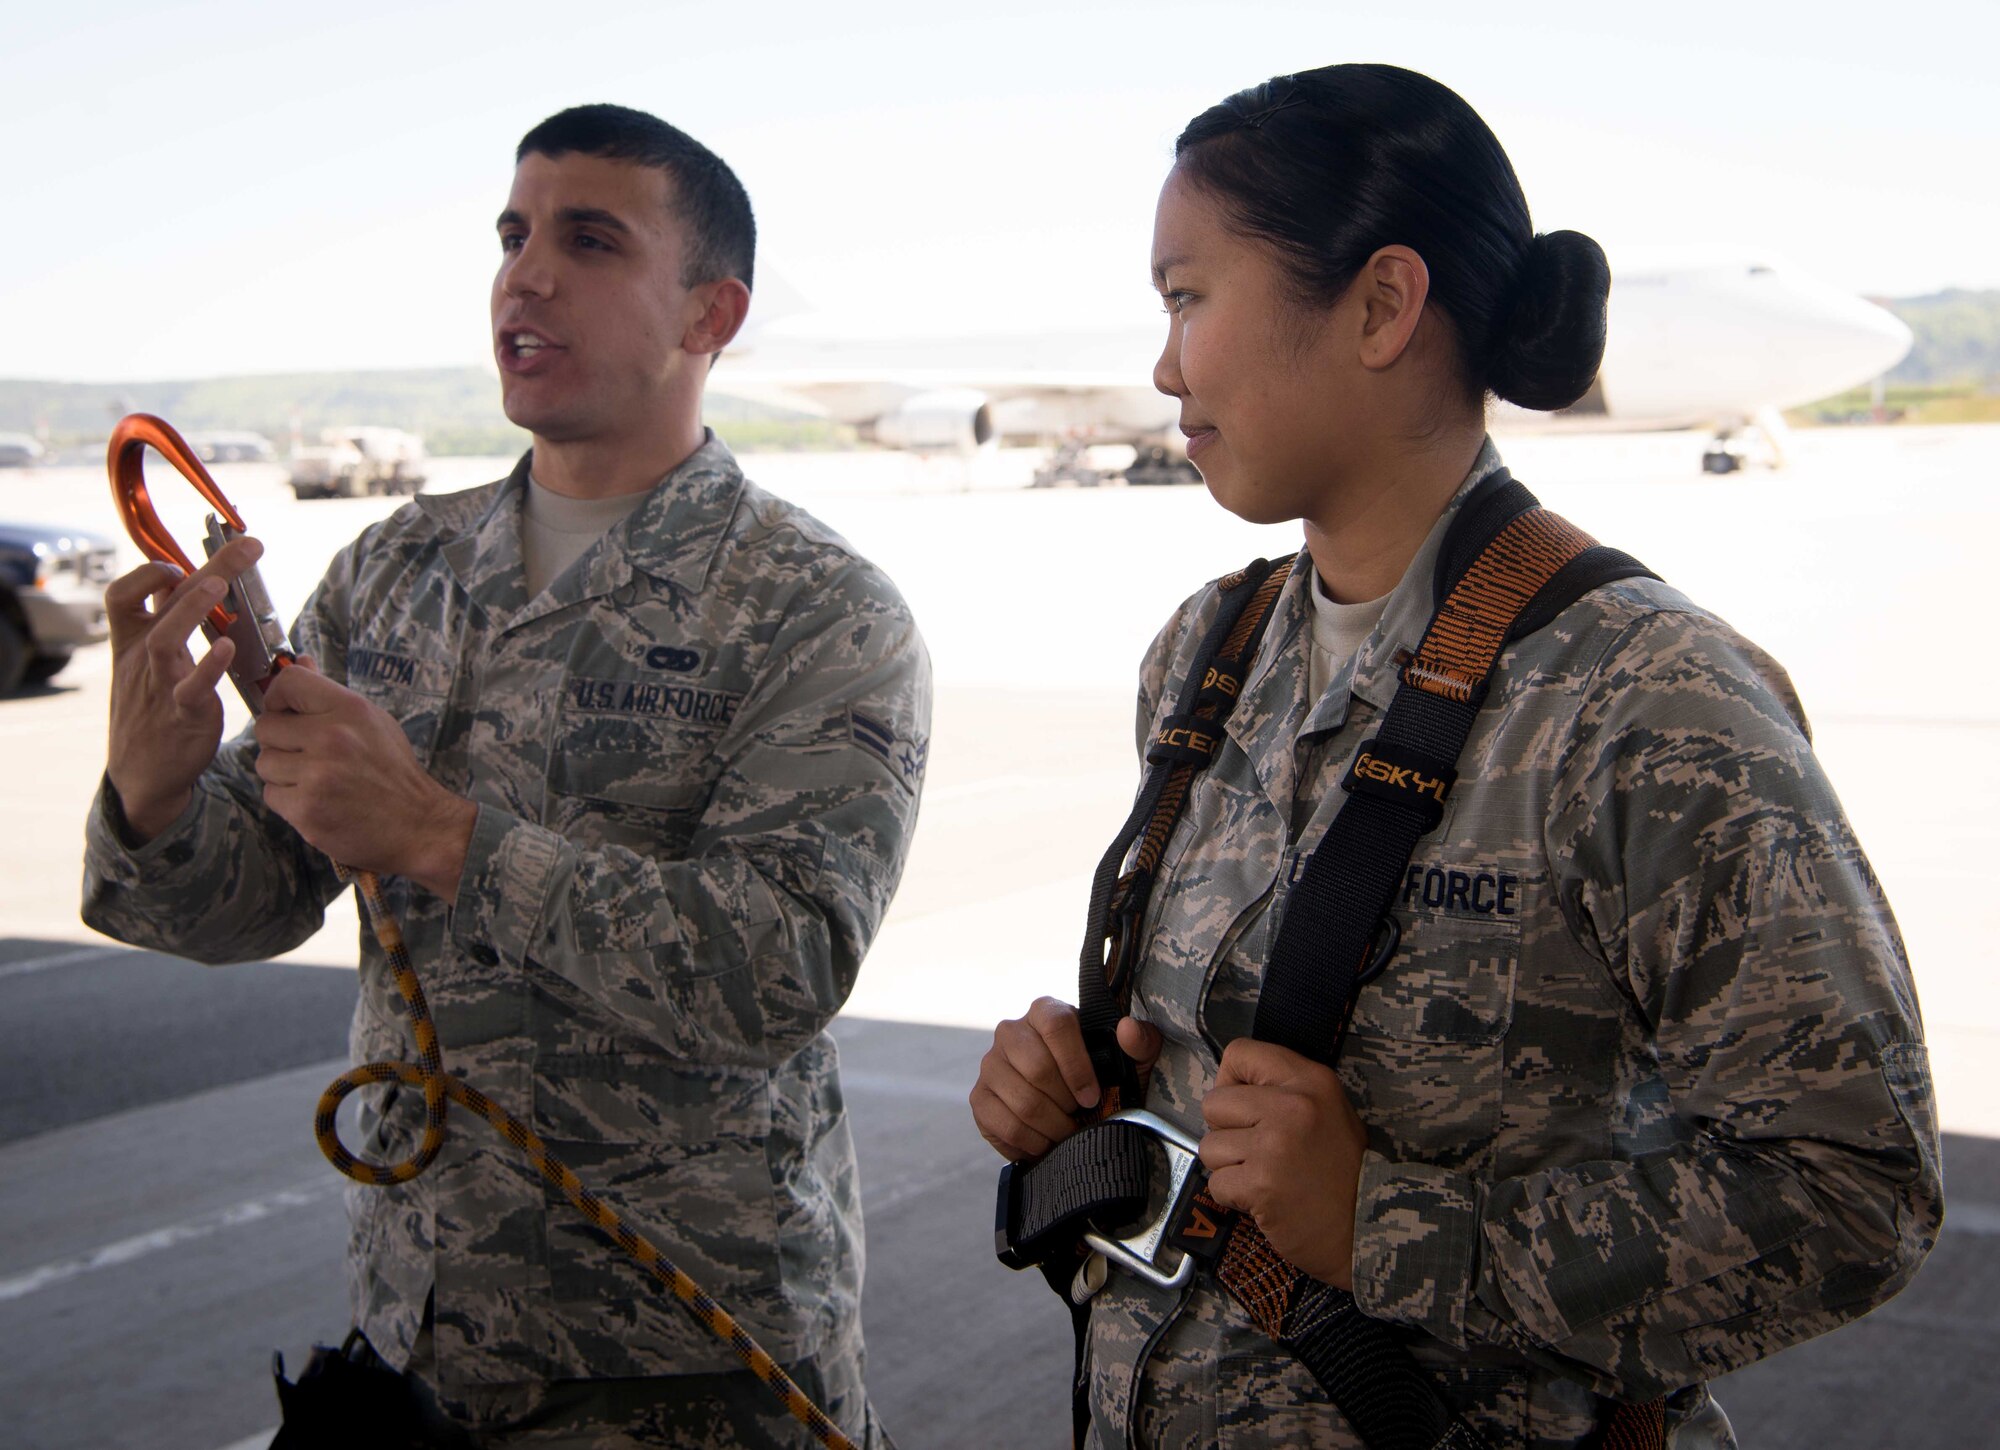 Airman 1st Class Hector Montoya, left, 721st Aerial Port Squadron ramp service specialist, uses a volunteer, 2nd Lt. Jenavee Viernes, 721st APS Combat Readiness and Resources Flight commander, to help demonstrate the use of a safety harness on Ramstein Air Base, Germany, May 10, 2017.  Between 2012 and 2016, Air Force personnel were involved in approximately 3,500 falls, not including sports-related falls, which resulted in 13 fatalities. (U.S. Air Force photo by Airman 1st Class Elizabeth Baker)